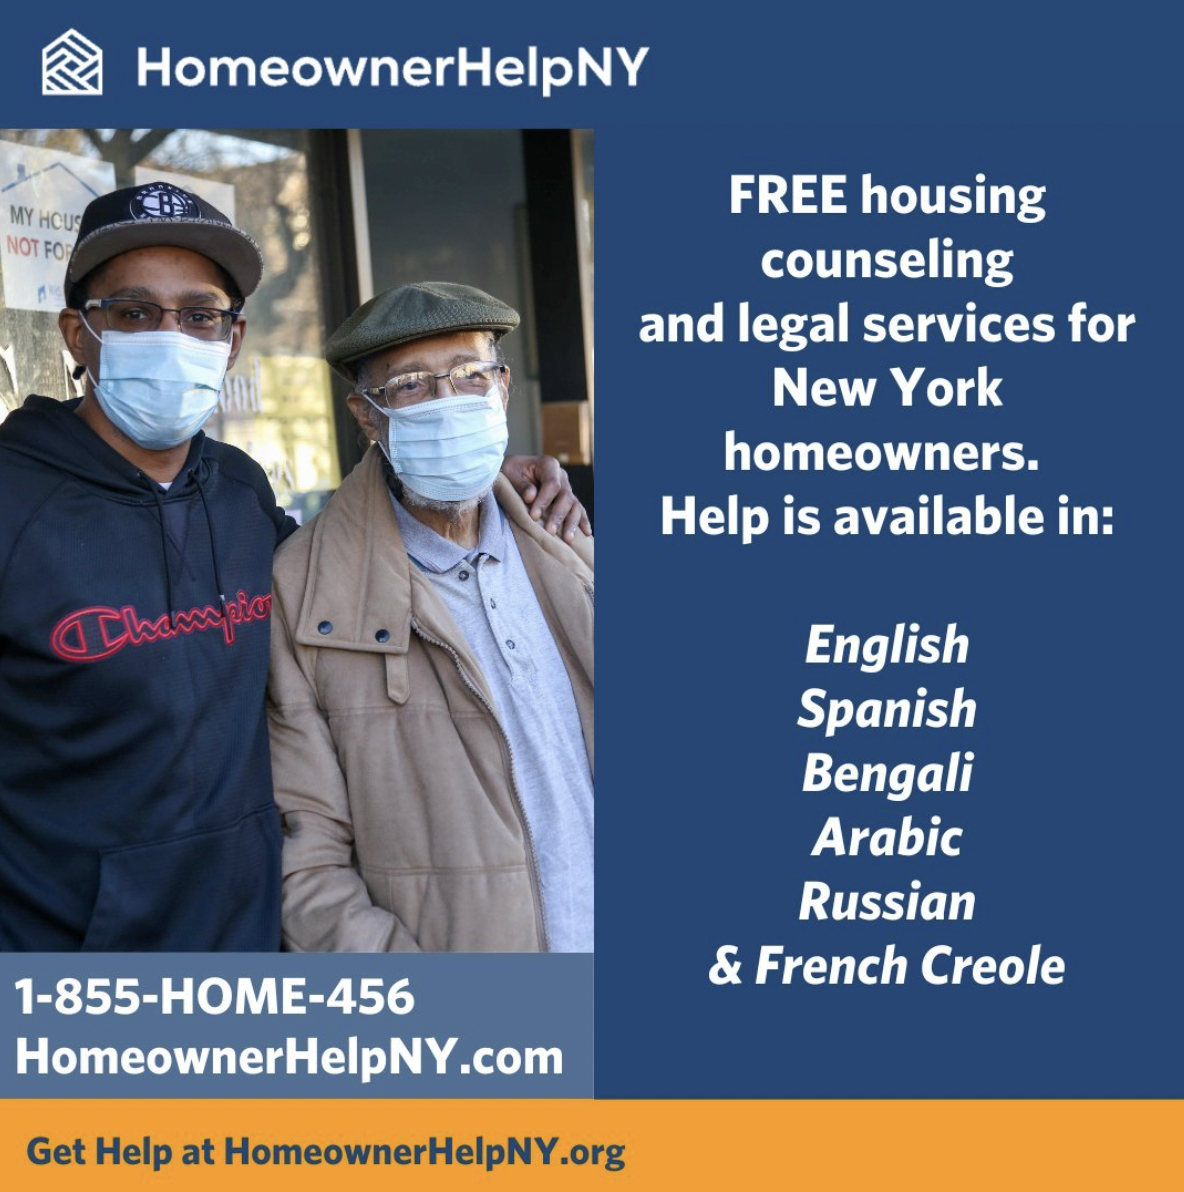 Free housing counseling and legal services for New York homeowners. Help is available in English, Spanish, Bengali, Arabic, Russian and French Creole. 1-855-HOME-456 HomeownerHelpNY.com